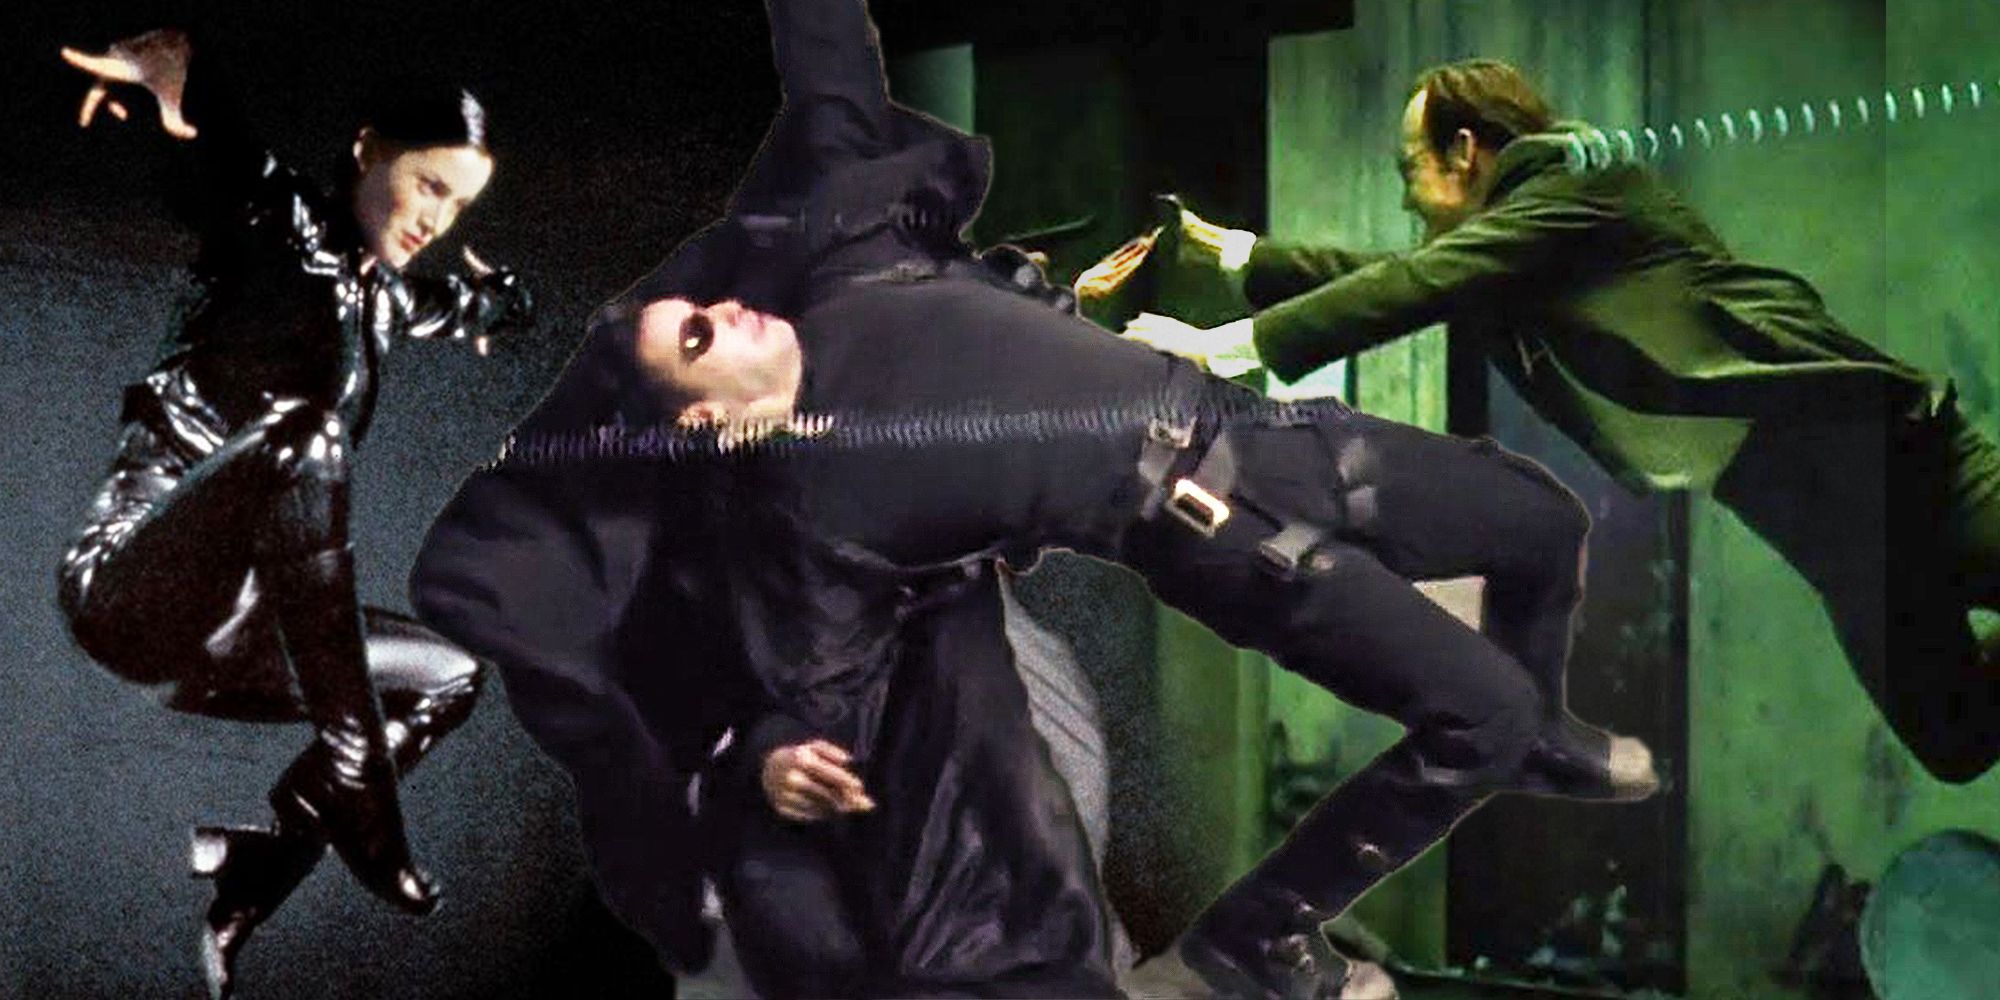 Trinity, Neo, and Agent Smith's Bullet Time Scenes in The Matrix Trilogy